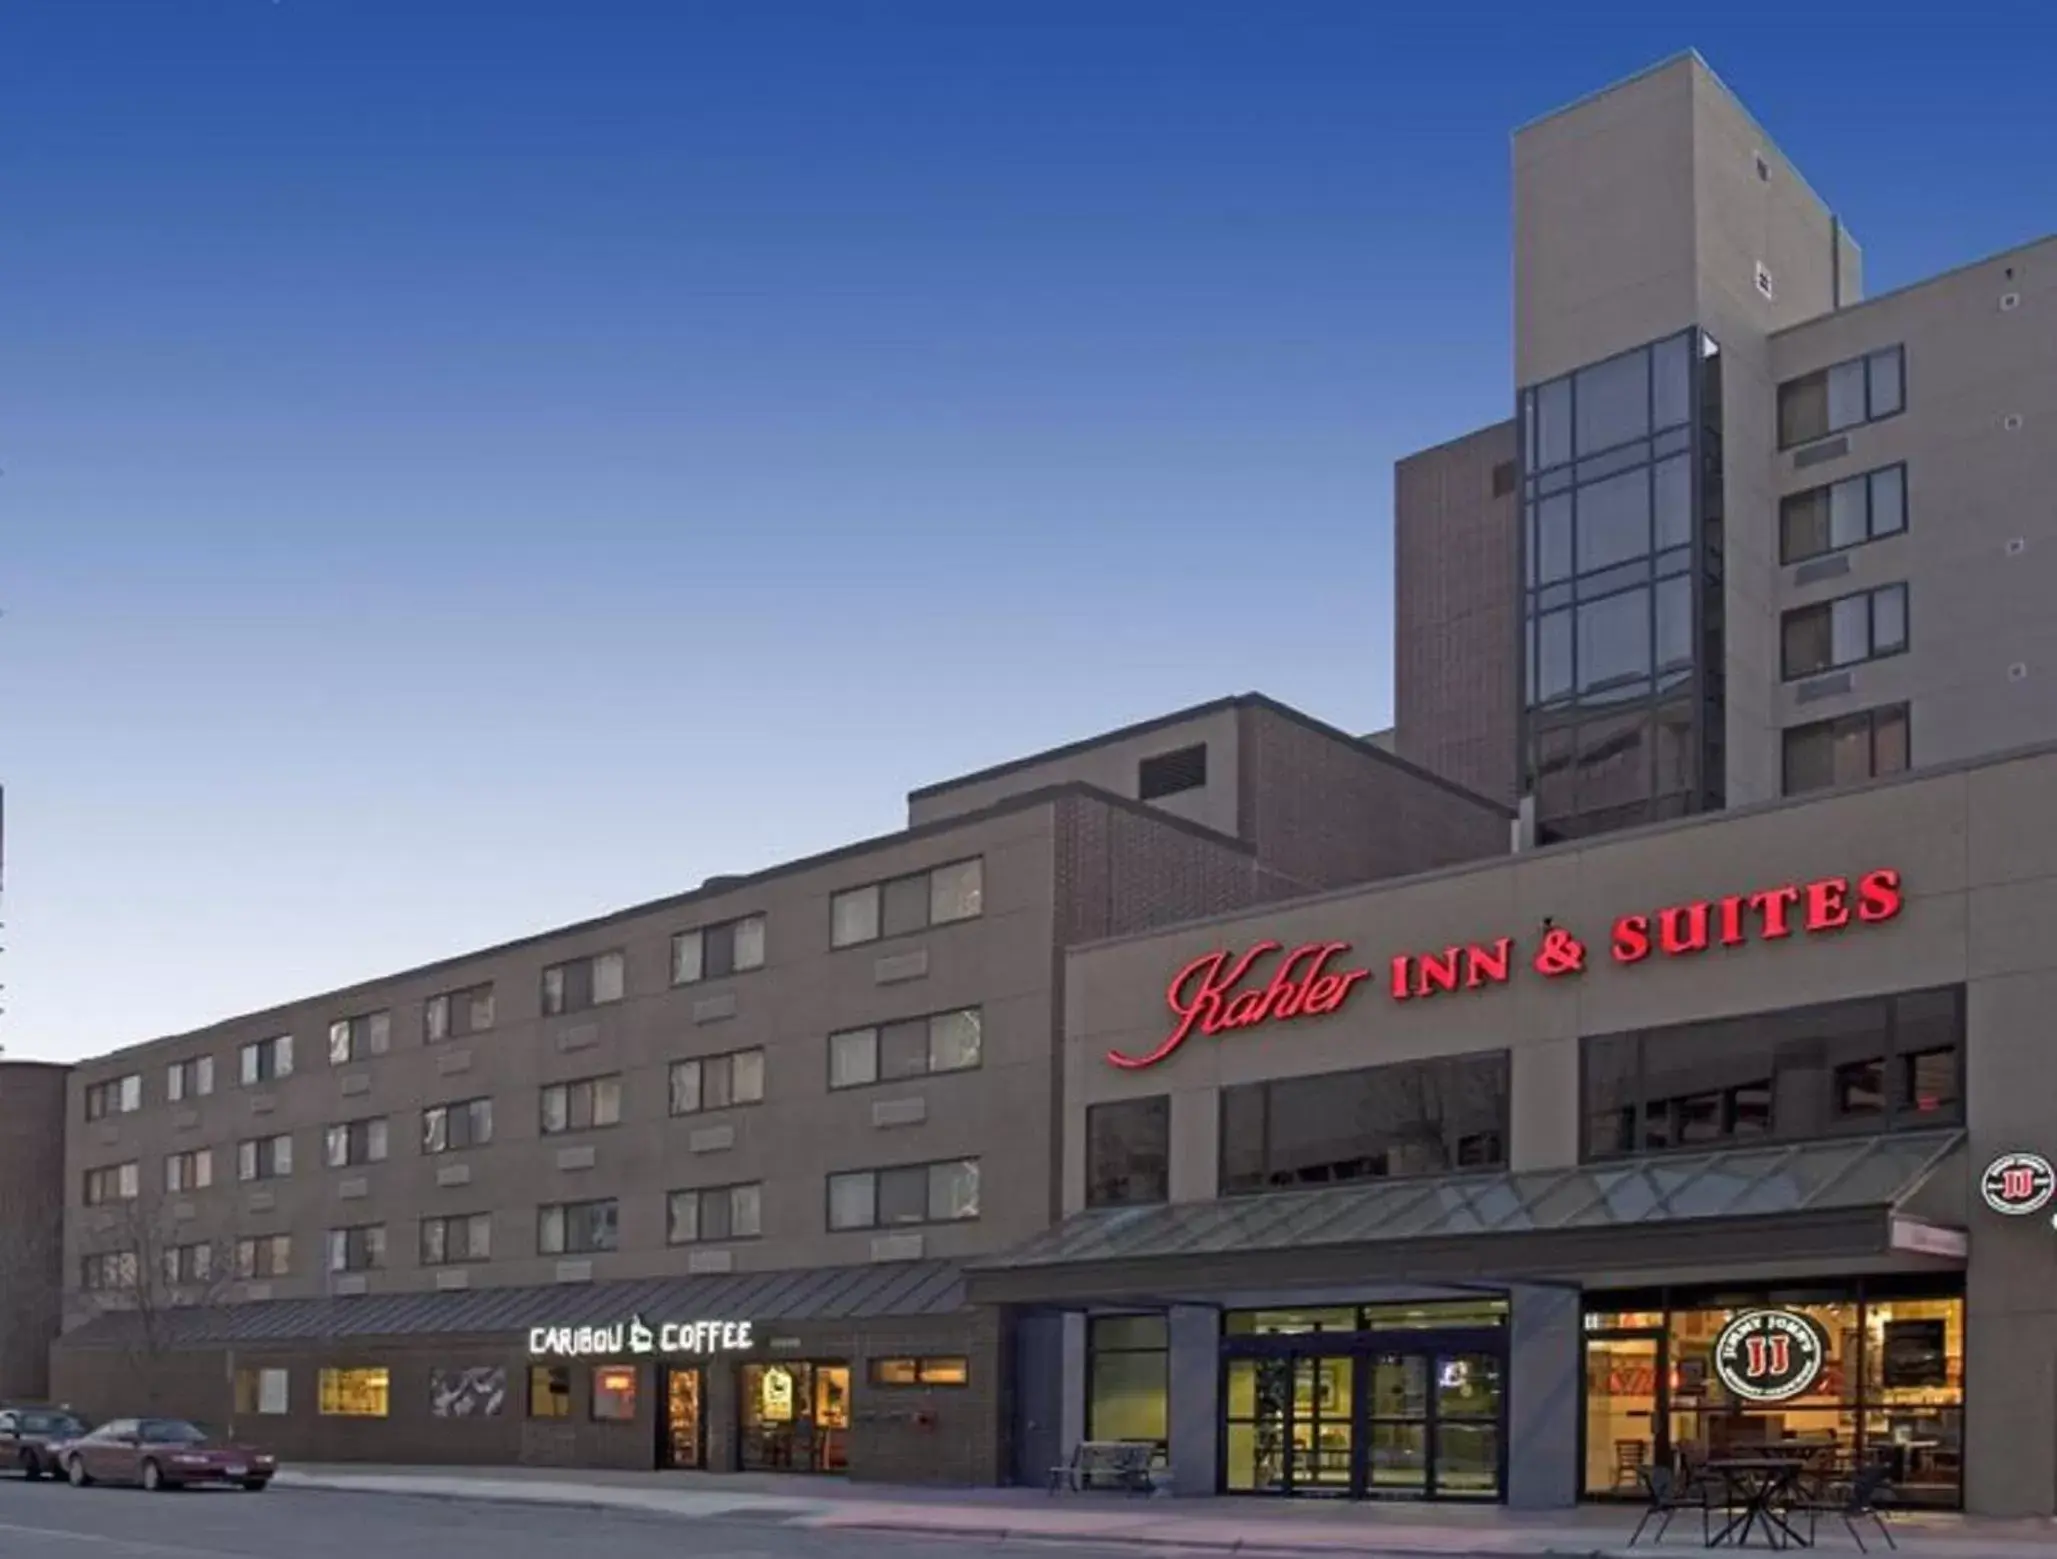 Facade/entrance in Kahler Inn and Suites